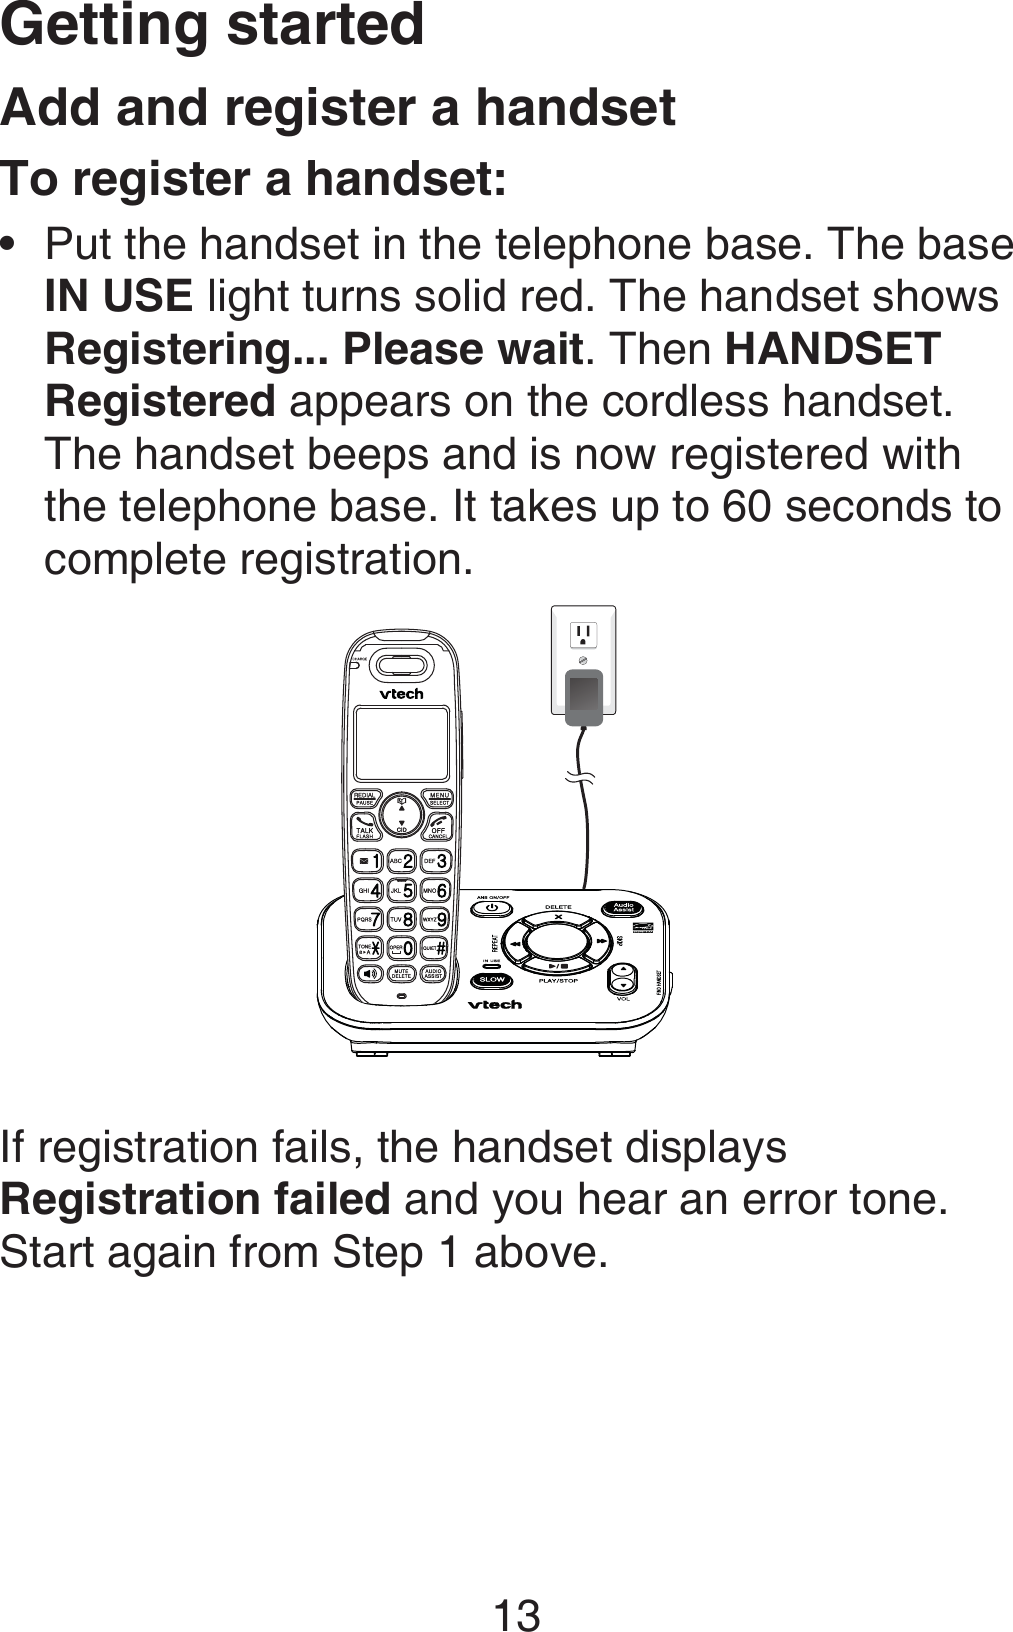 Getting started13Add and register a handsetTo register a handset:Put the handset in the telephone base. The base  IN USE light turns solid red. The handset shows Registering... Please wait. Then HANDSET Registered appears on the cordless handset. The handset beeps and is now registered with the telephone base. It takes up to 60 seconds to complete registration.If registration fails, the handset displays Registration failed and you hear an error tone. Start again from Step 1 above.•